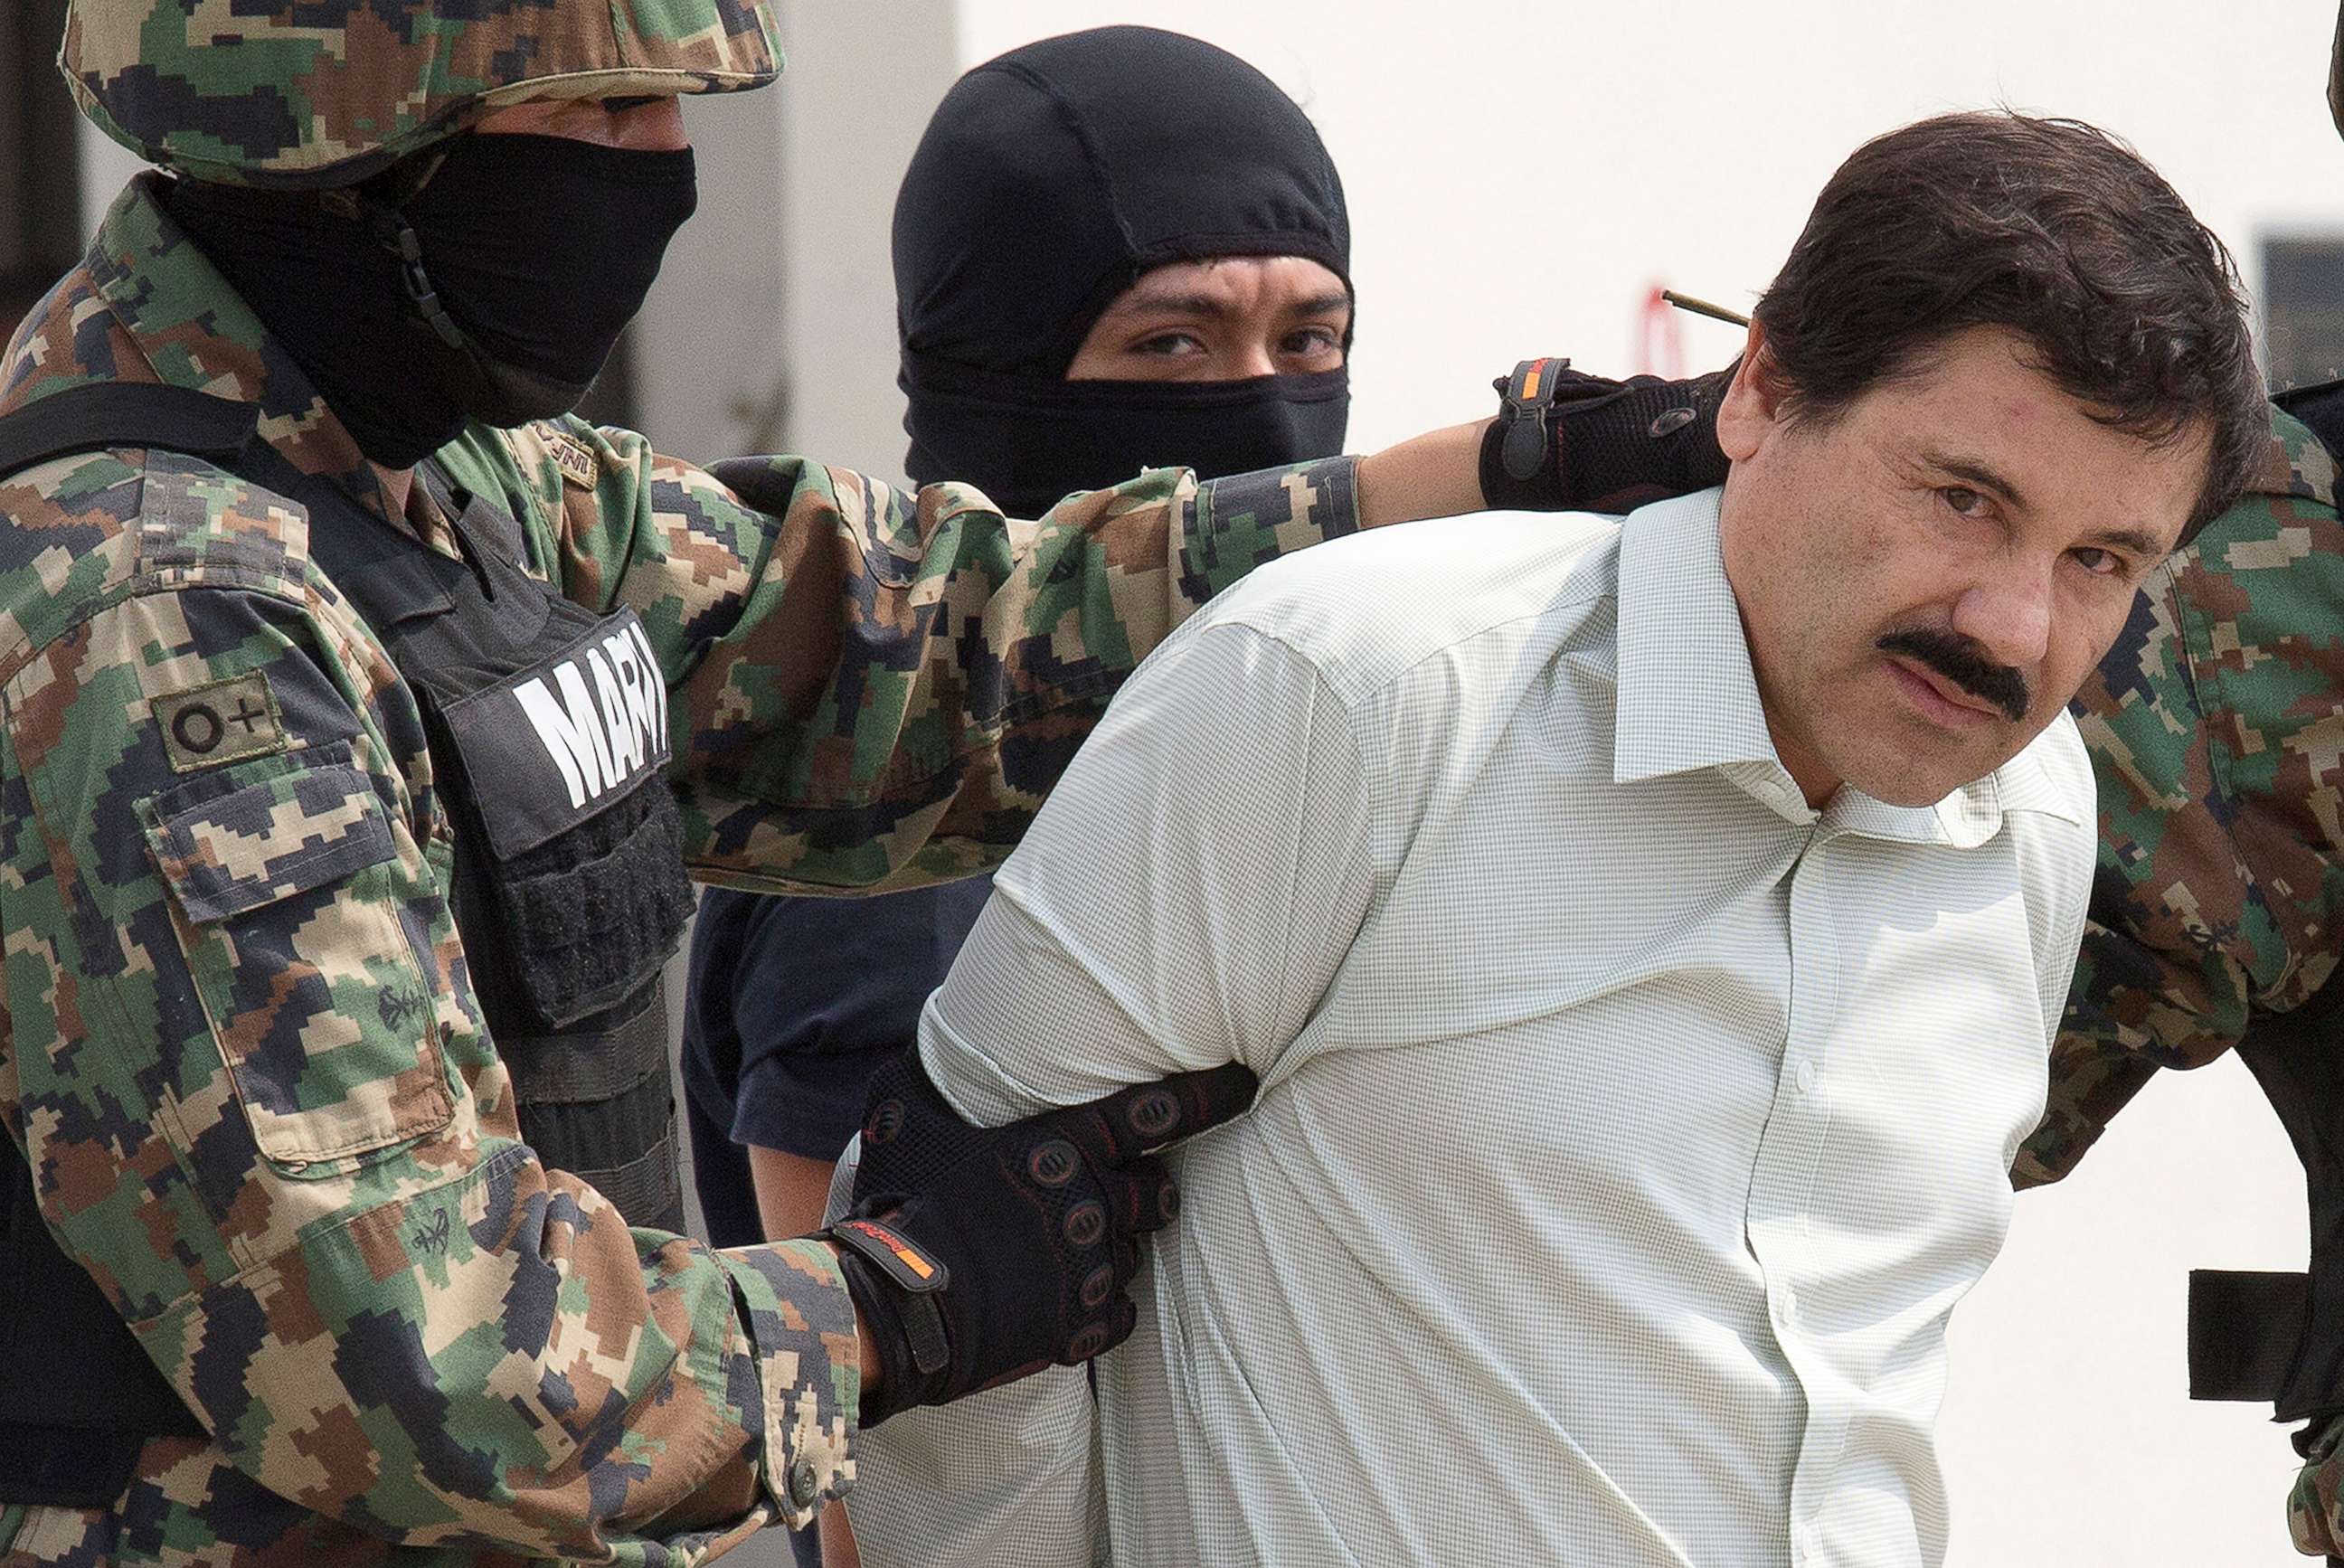 PHOTO: Joaquin "El Chapo" Guzman is escorted to a helicopter by Mexican security forces at Mexico's International Airport in Mexico city, Feb. 22, 2014.